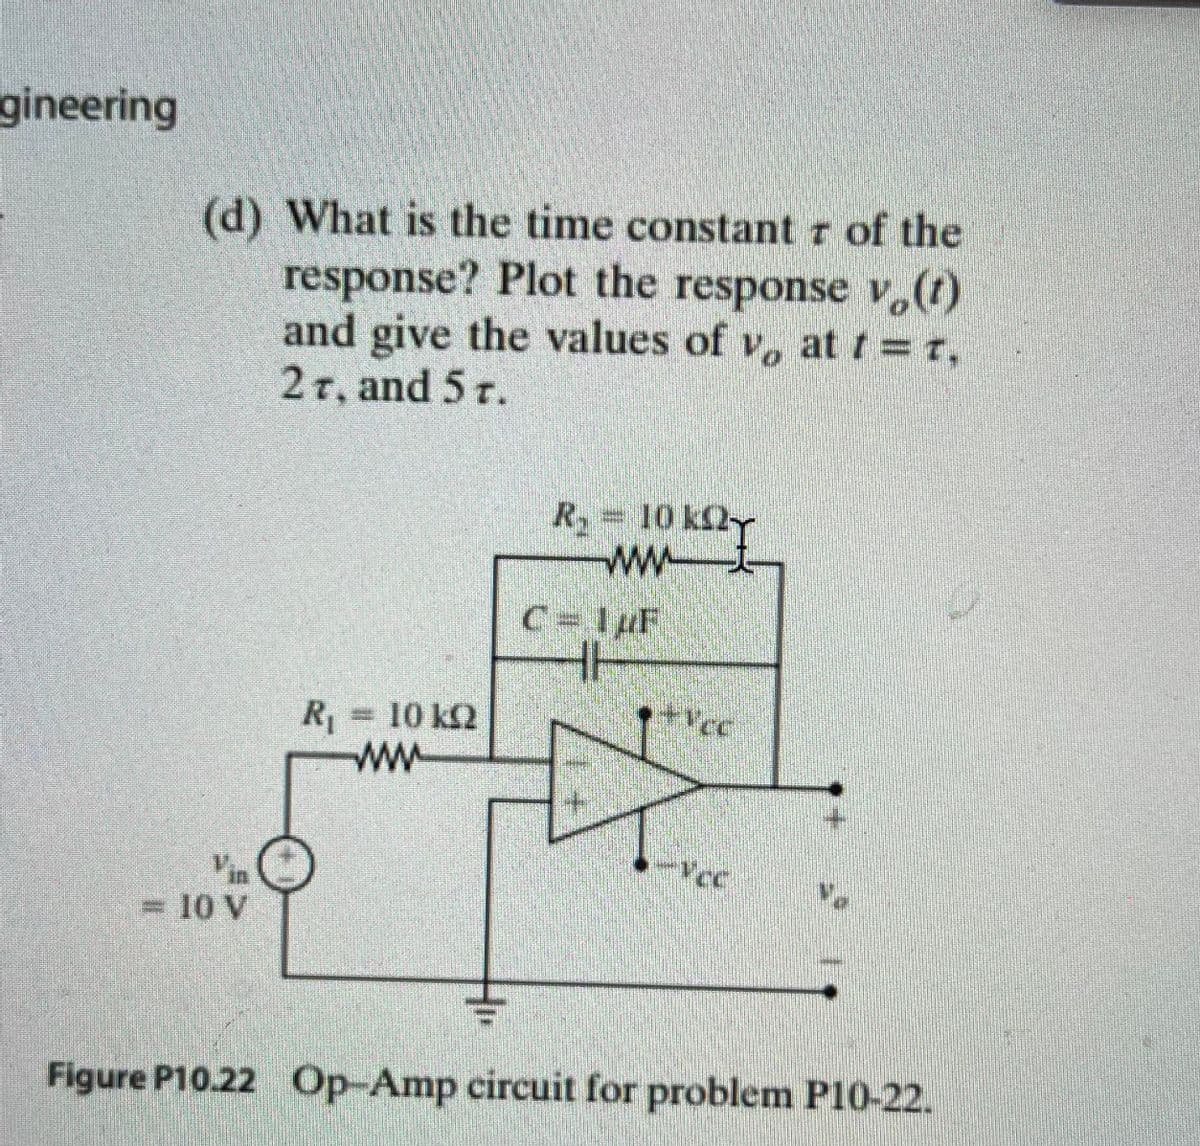 gineering
(d) What is the time constant r of the
response? Plot the response v,(1)
and give the values of v, at t = r,
2T, and 5 r.
R 10 k2-
wwt
C= 1pF
R=10 k2
ww
= 10 V
Figure P10.22 Op-Amp circuit for problem P10-22.
